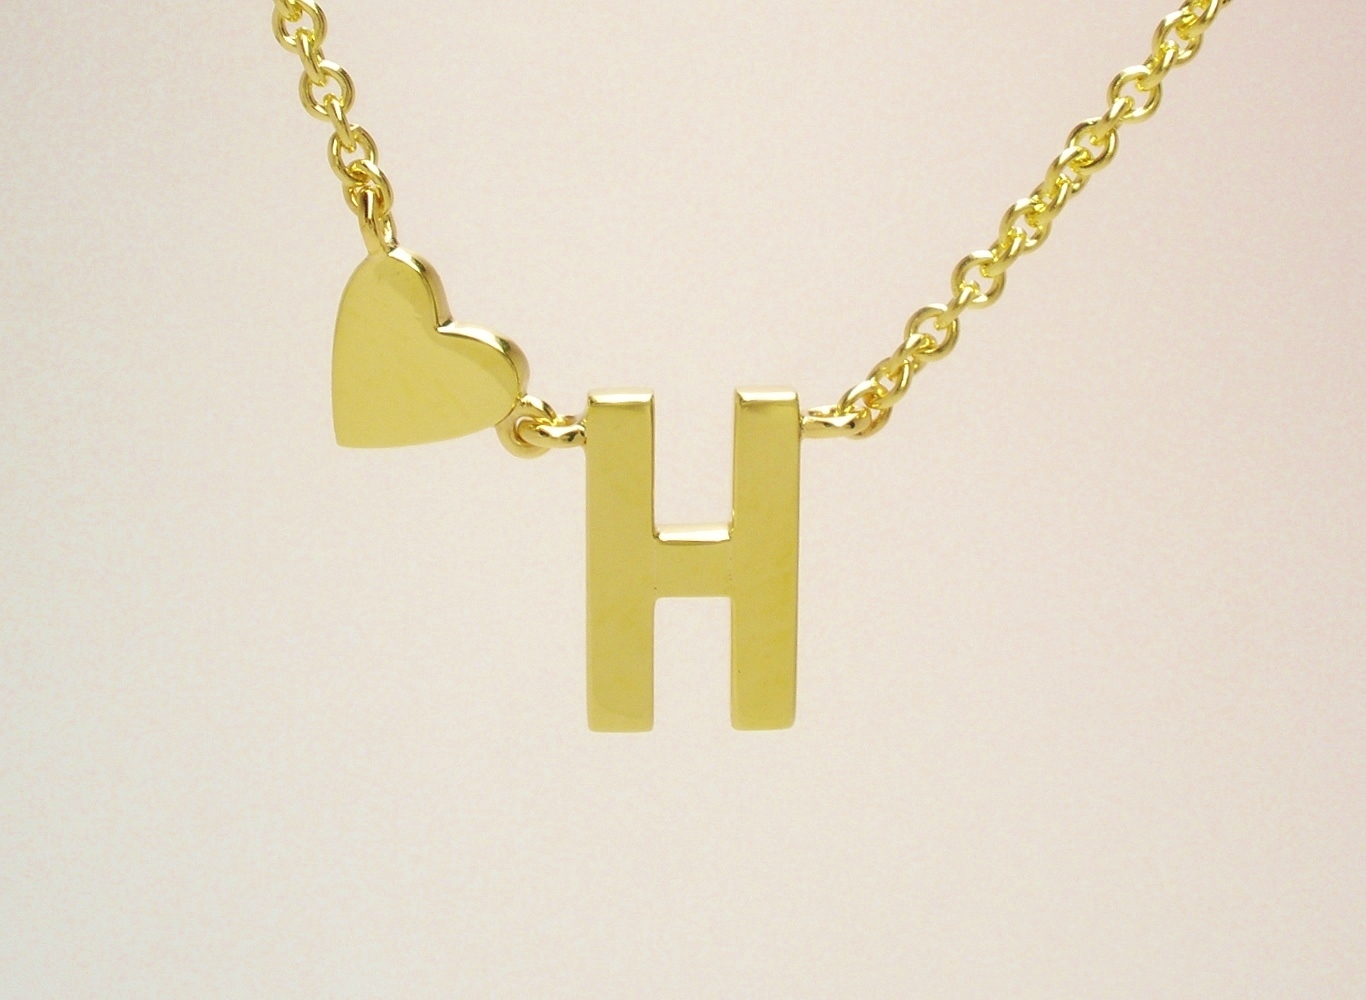 A 9ct. yellow gold initial 'H' and heart pendant created from a deceased family members wedding ring.